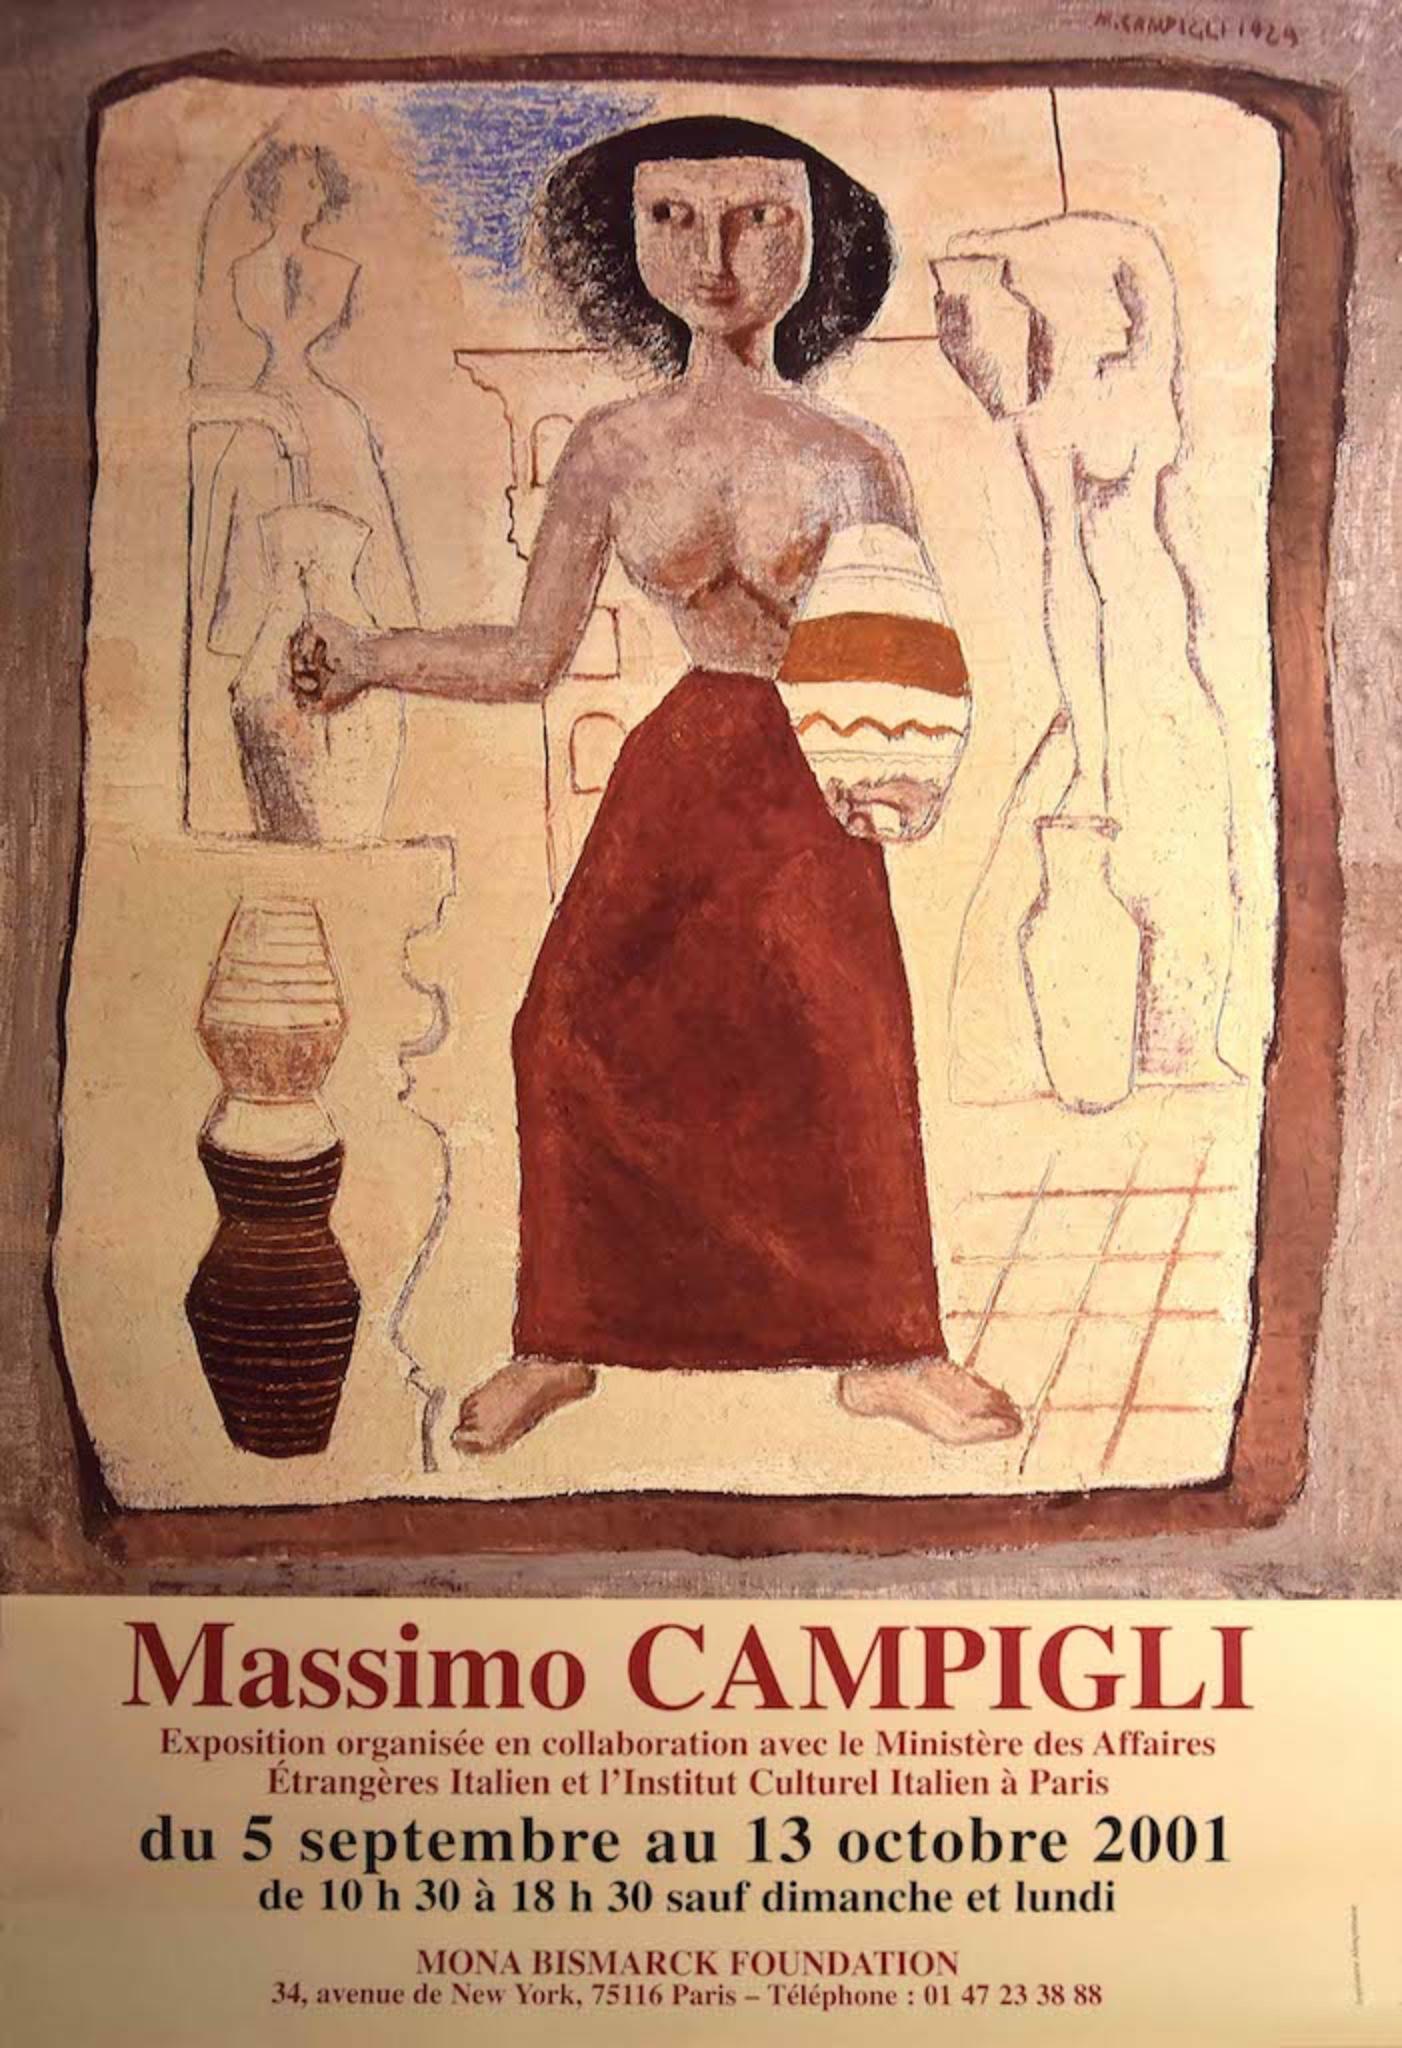 Woman - Vintage Poster after Massimo Campigli - 2001